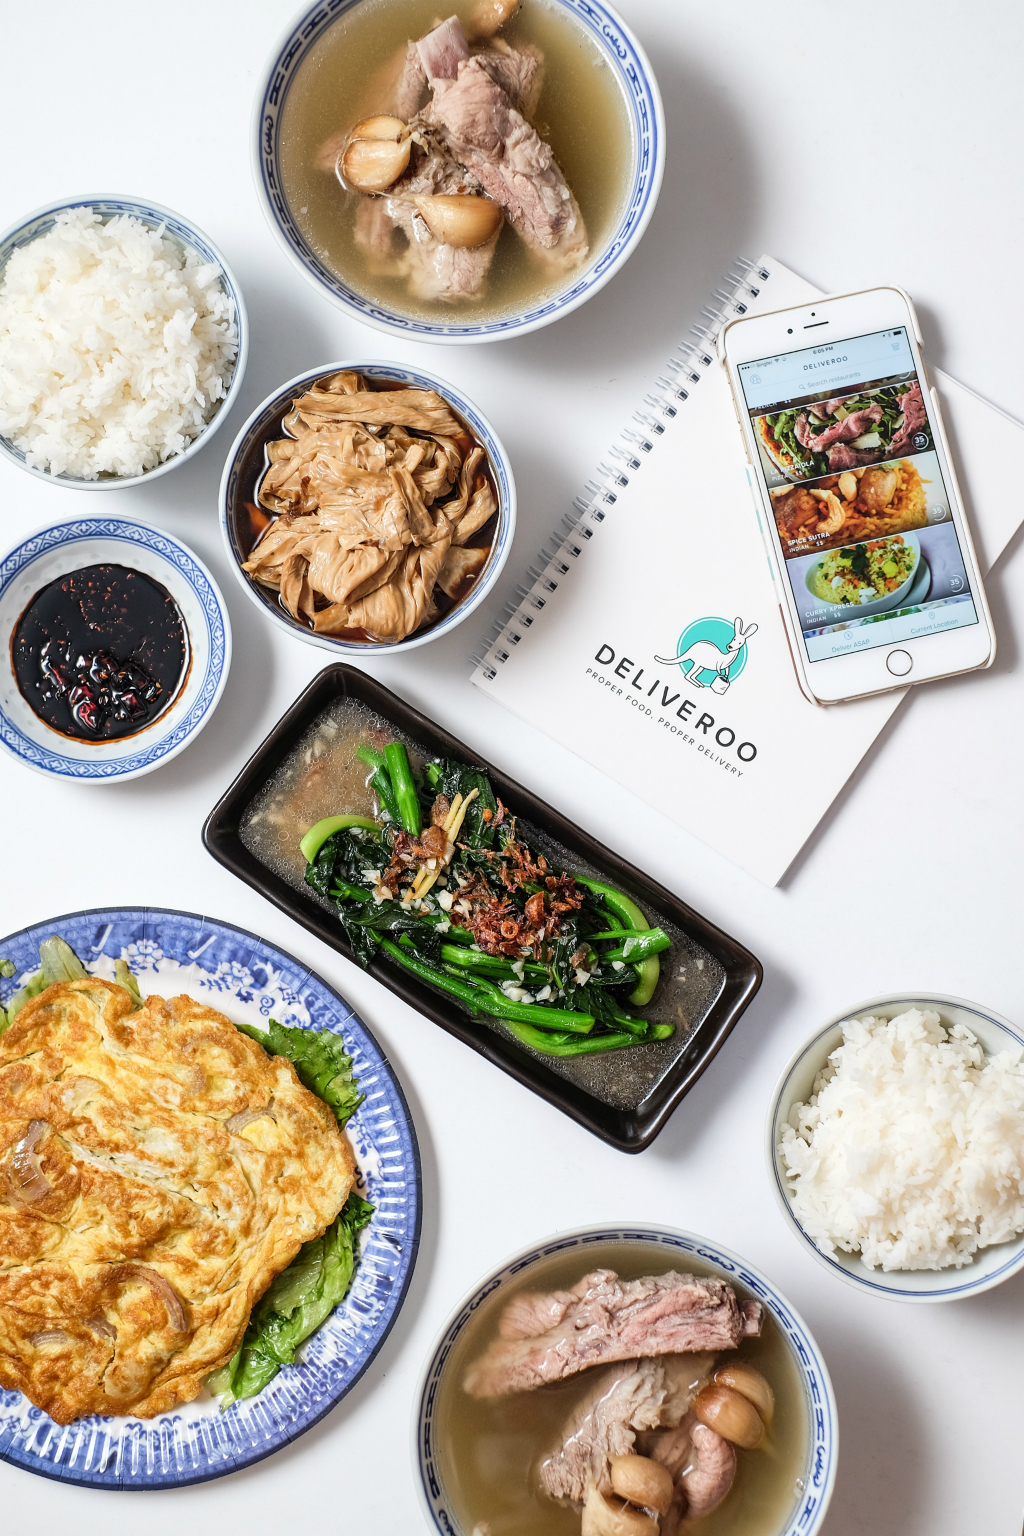 Rong Cheng Bak Kut Teh on Deliveroo